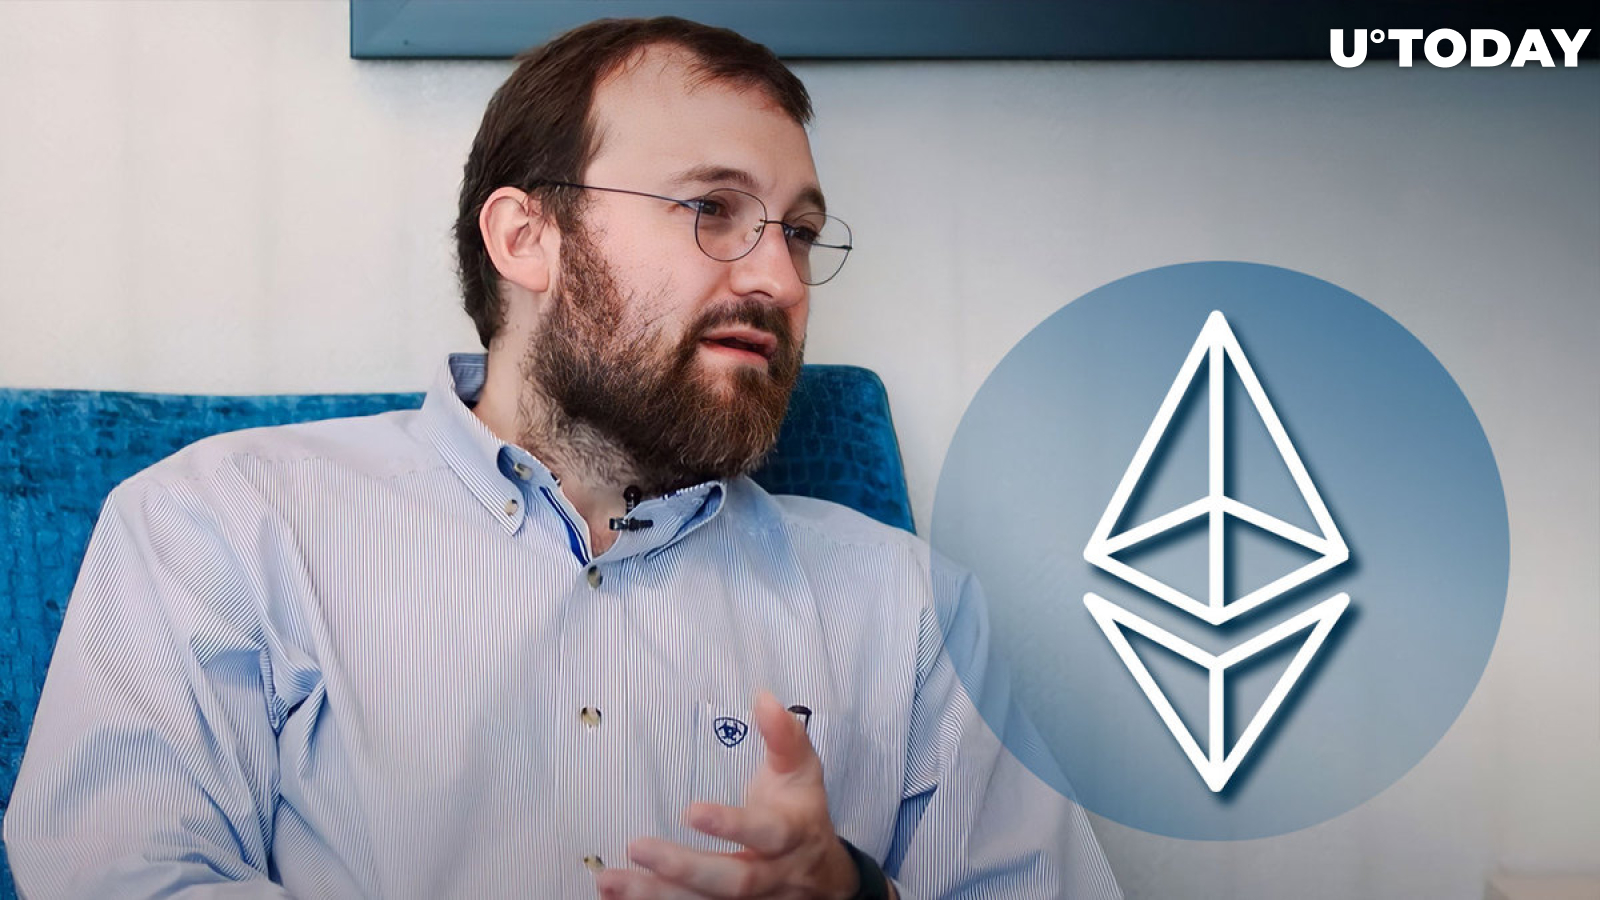 Cardano CEO Says Ethereum Staking Is Problematic, Here's Why